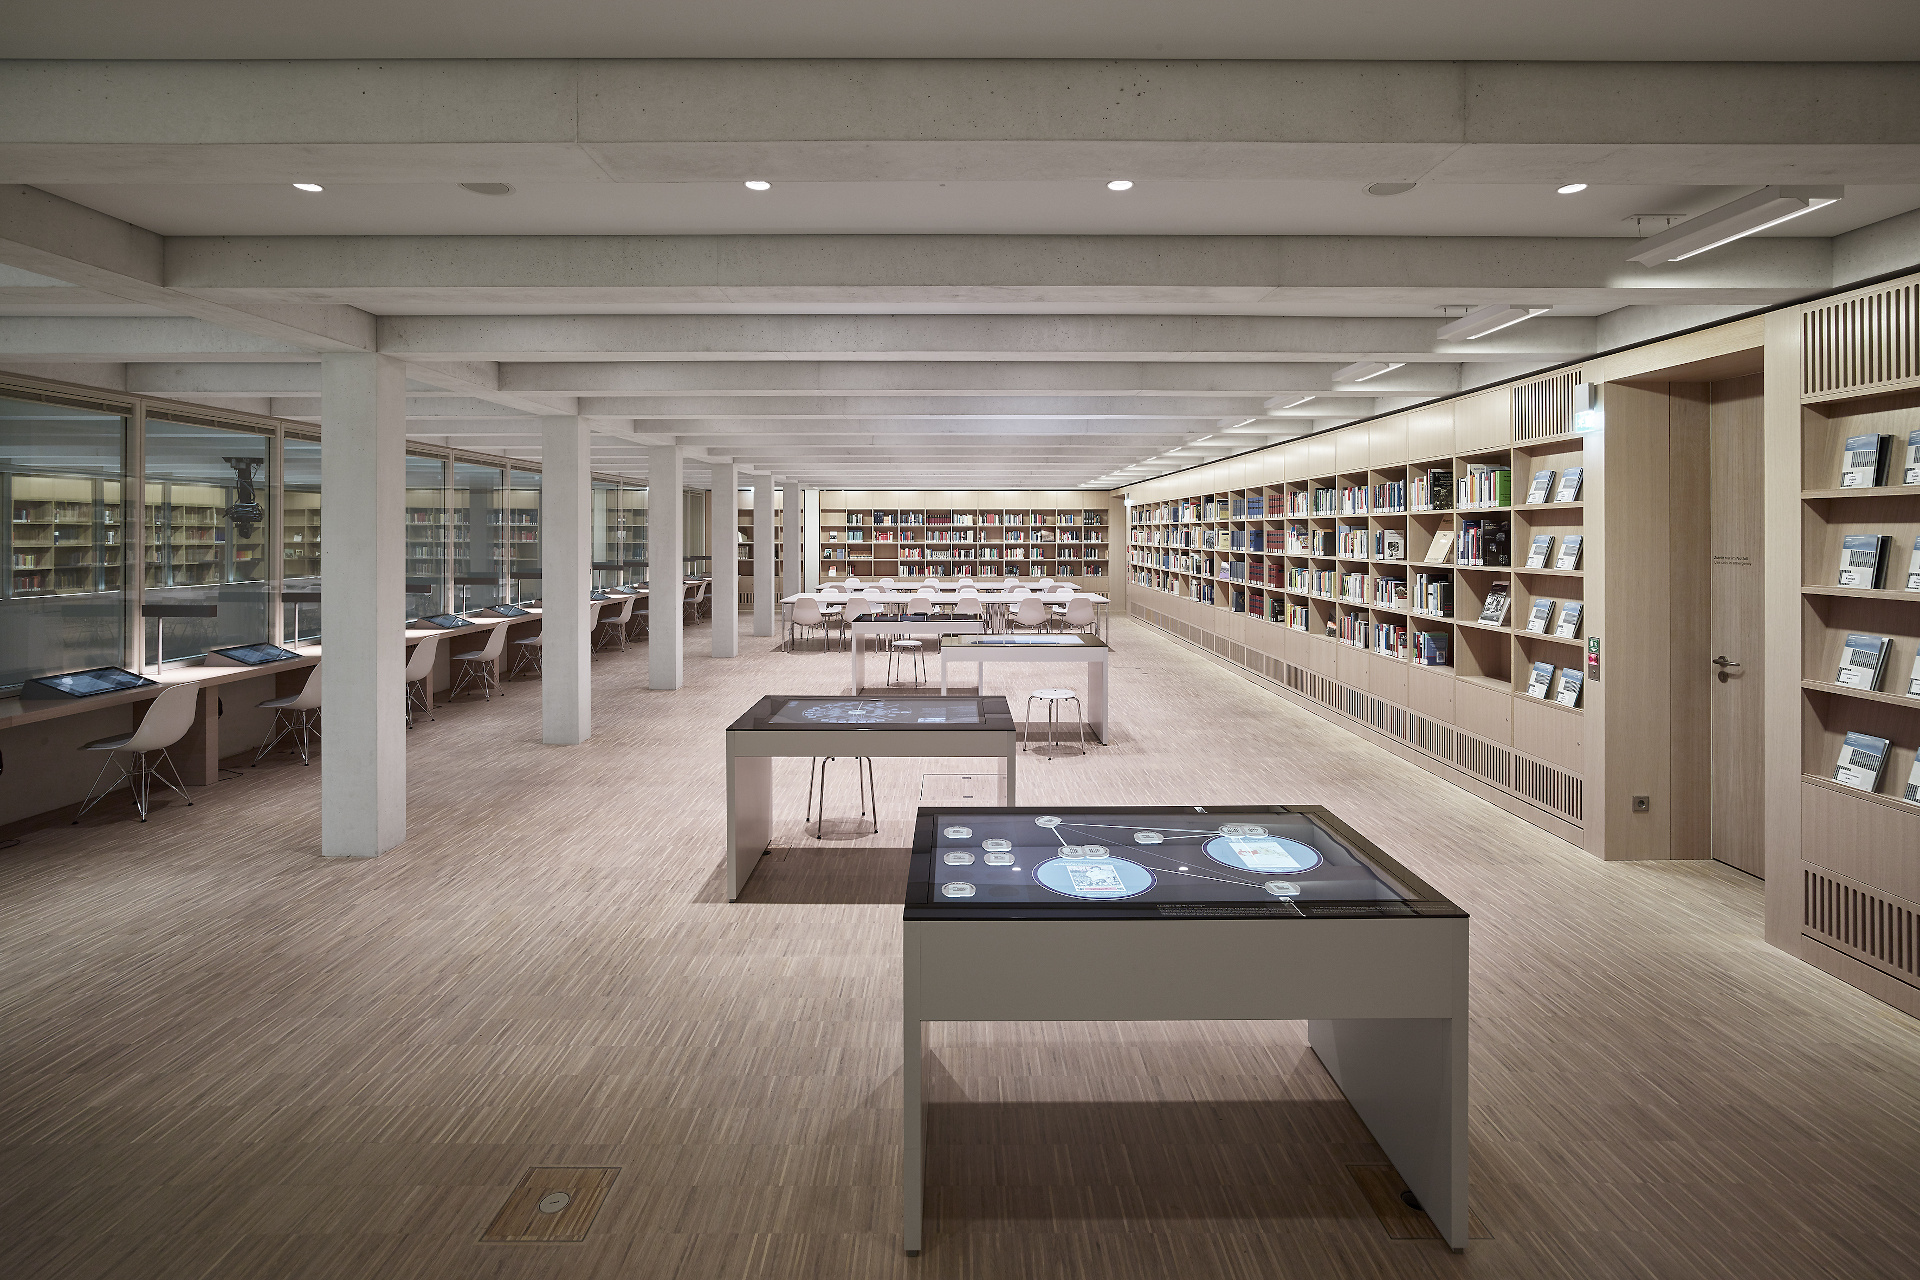 There are four media tables in the foreground. On the right are touch screen terminals and on the left the reference library bookshelves.